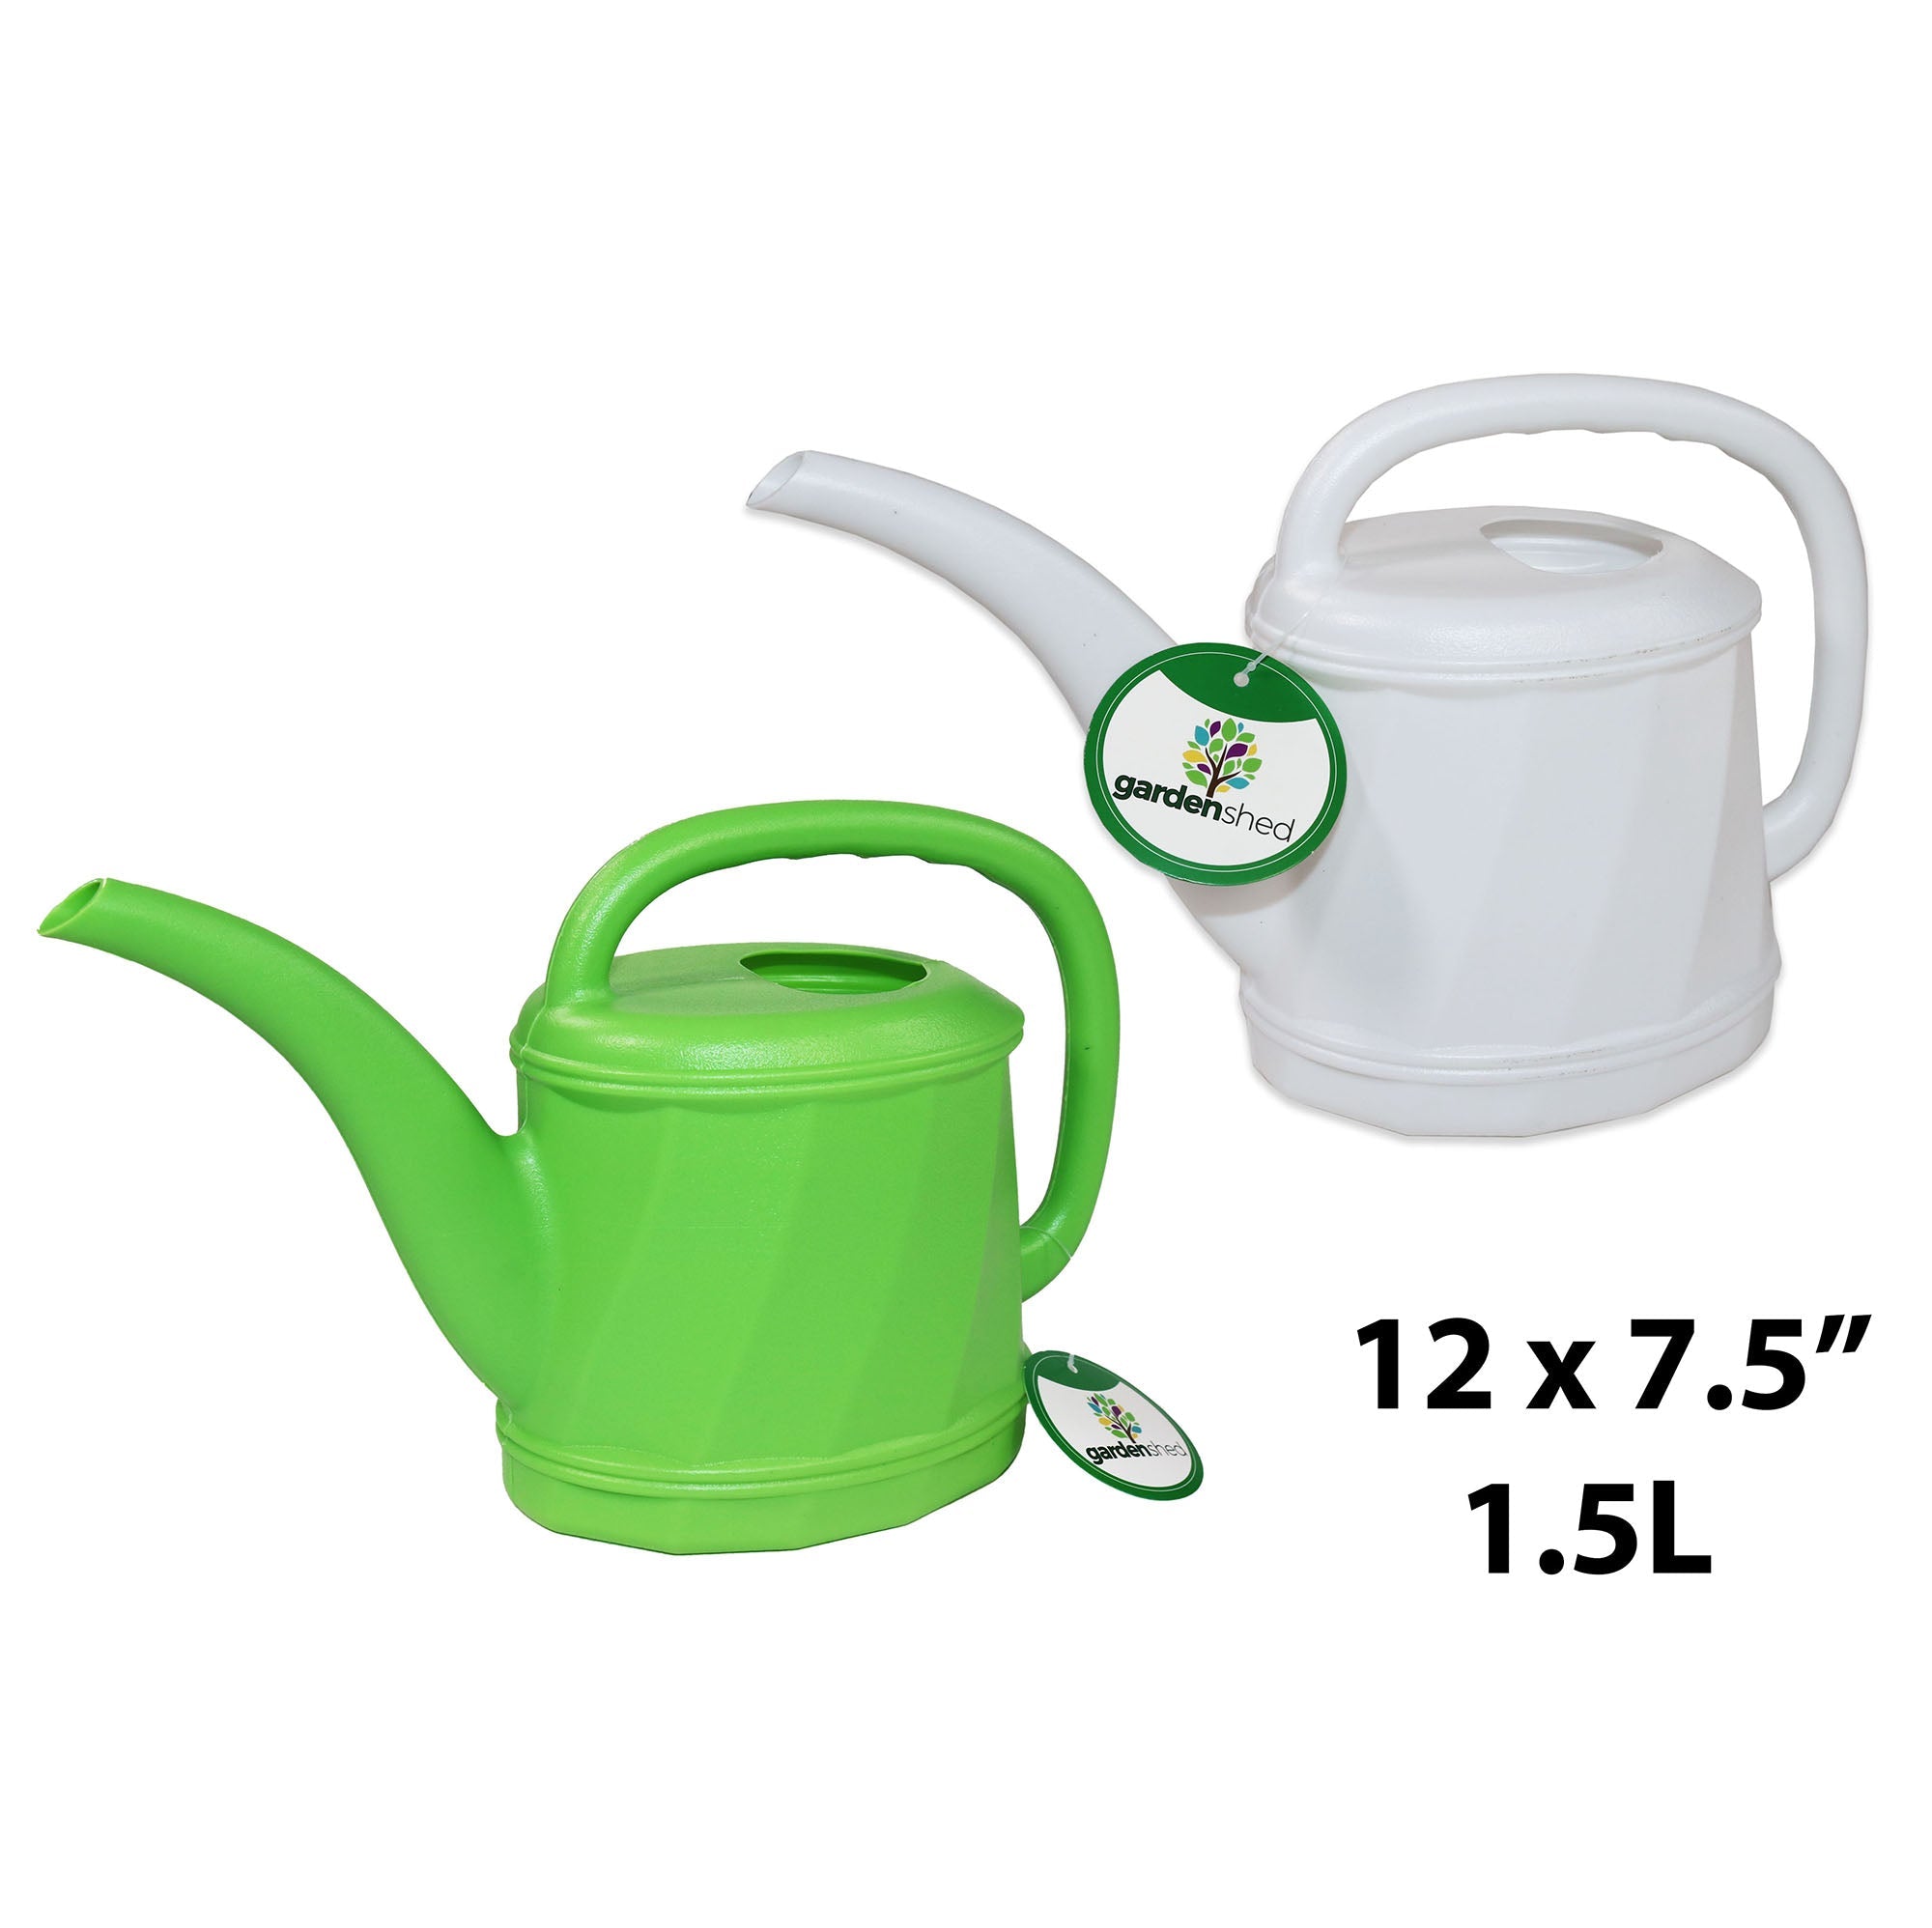 Garden Shed Plastic Watering Can 1.5L